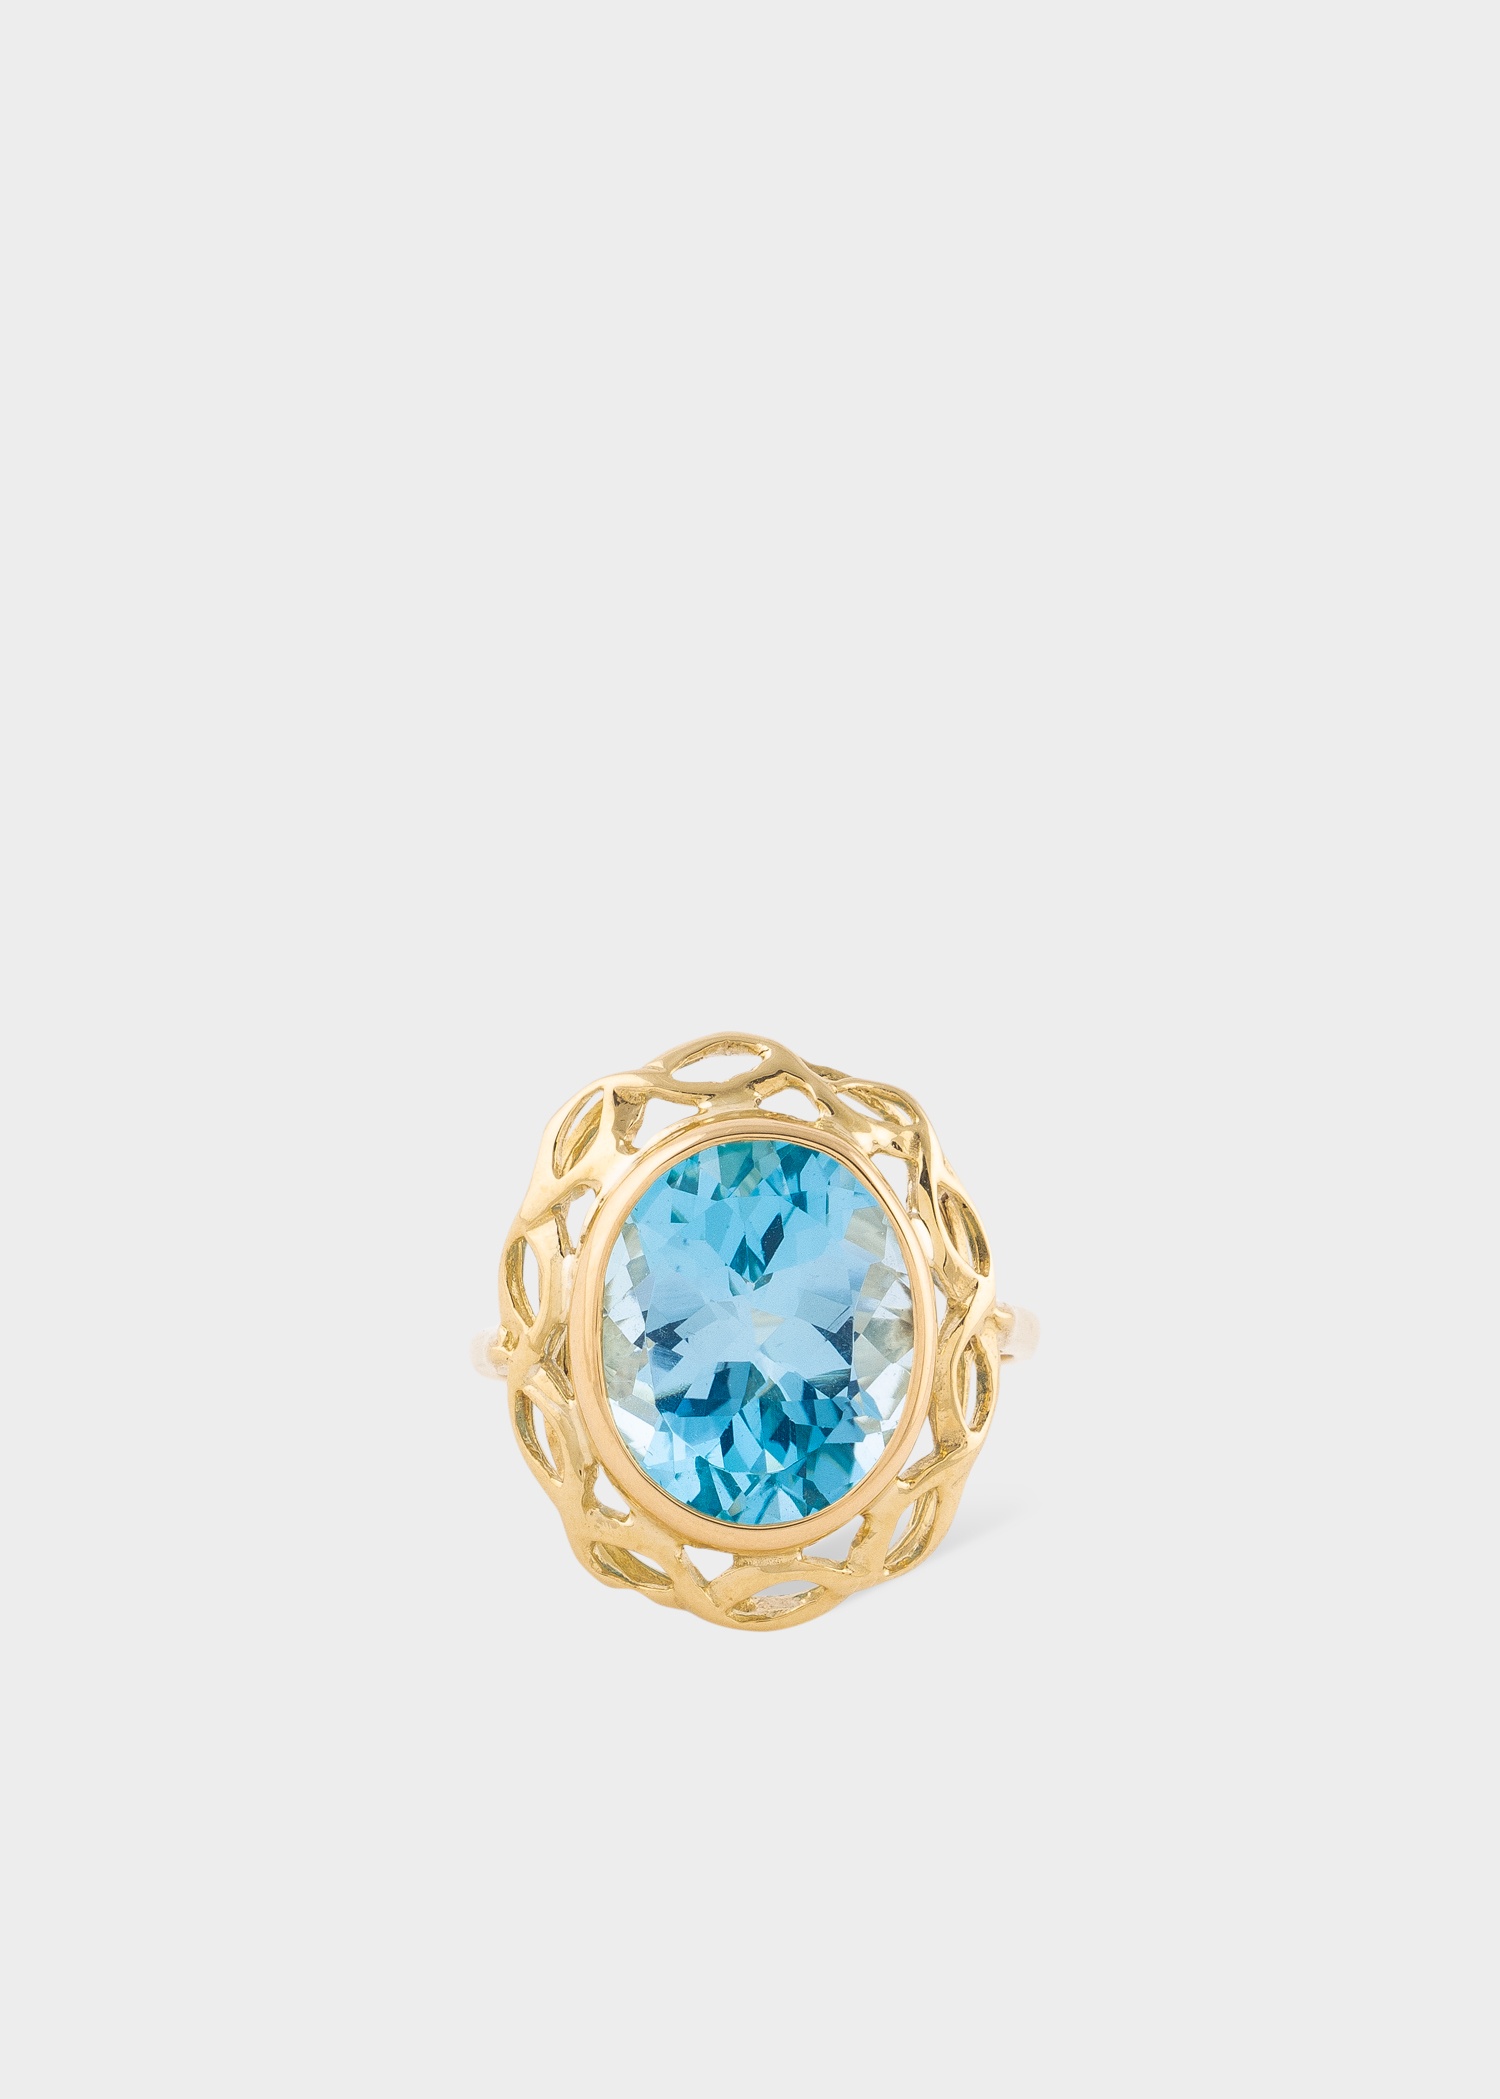 'Enormous Sky Blue Topaz' Gold Cocktail Ring - 1